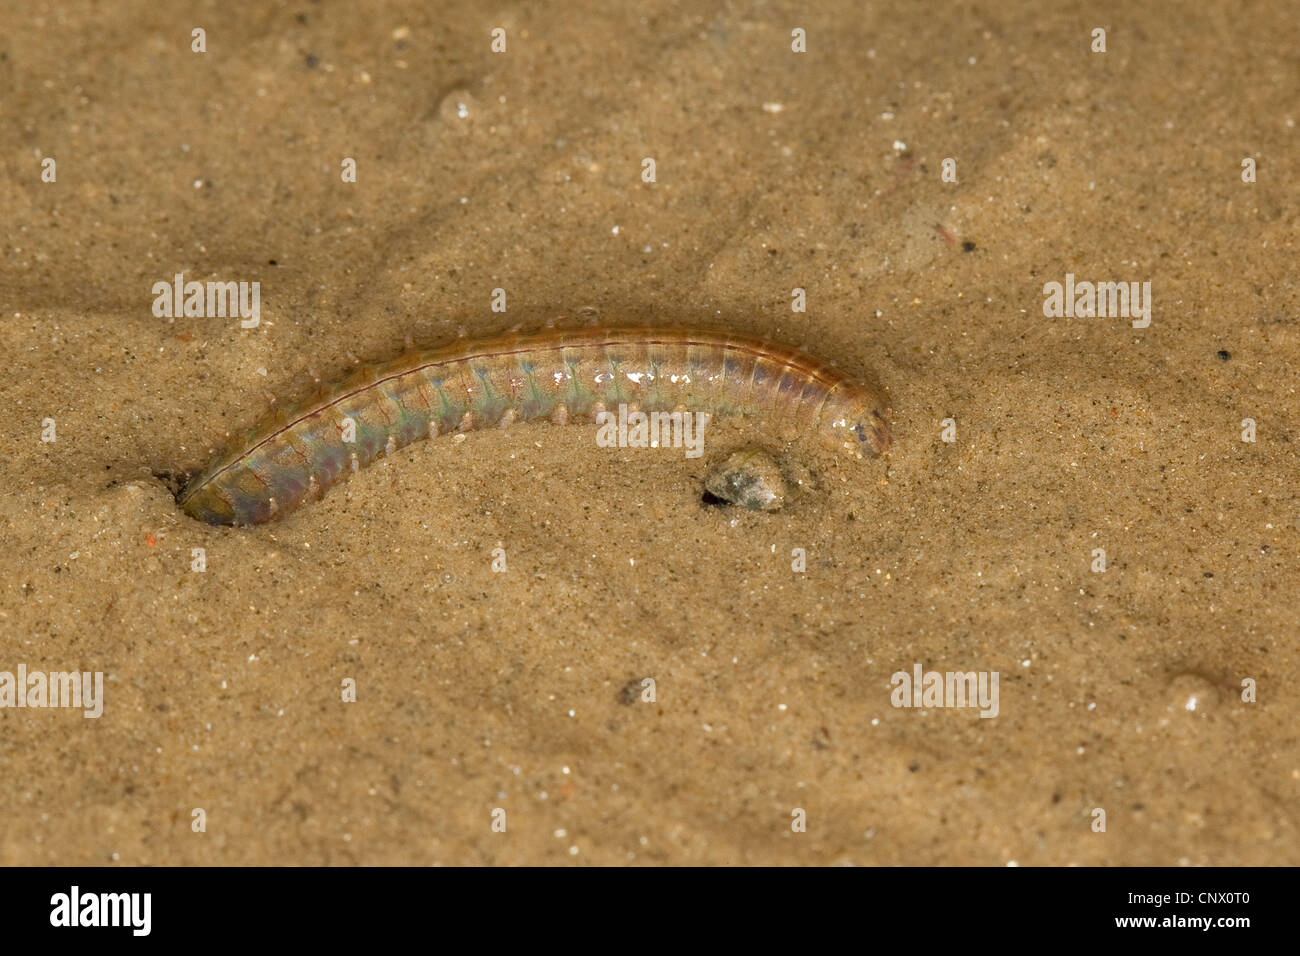 estuary ragworm (Nereis diversicolor, Hediste diversicolor), peering from out of their den, Germany Stock Photo